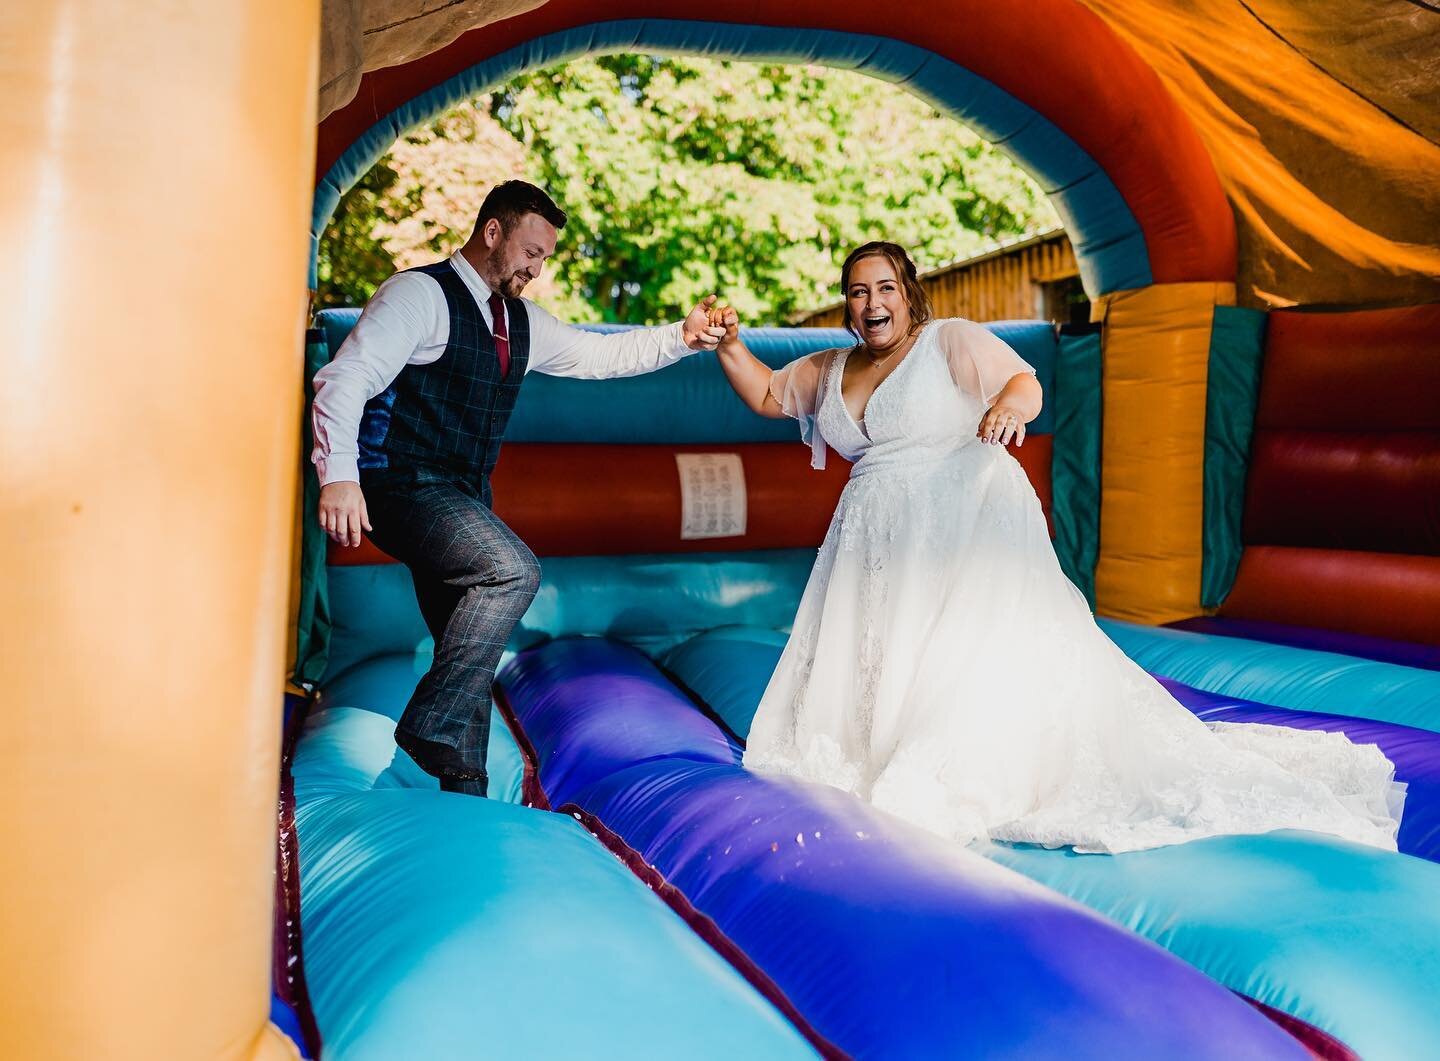 I had the pleasure of capturing Danielle &amp; Lee's Wedding at Wold View Farm and what a scorcher it was! ☀️ Luckily Abbyo's Ice Cream came to the rescue to cool us all off with their delicious selection of flavours🍦

They also had garden games and